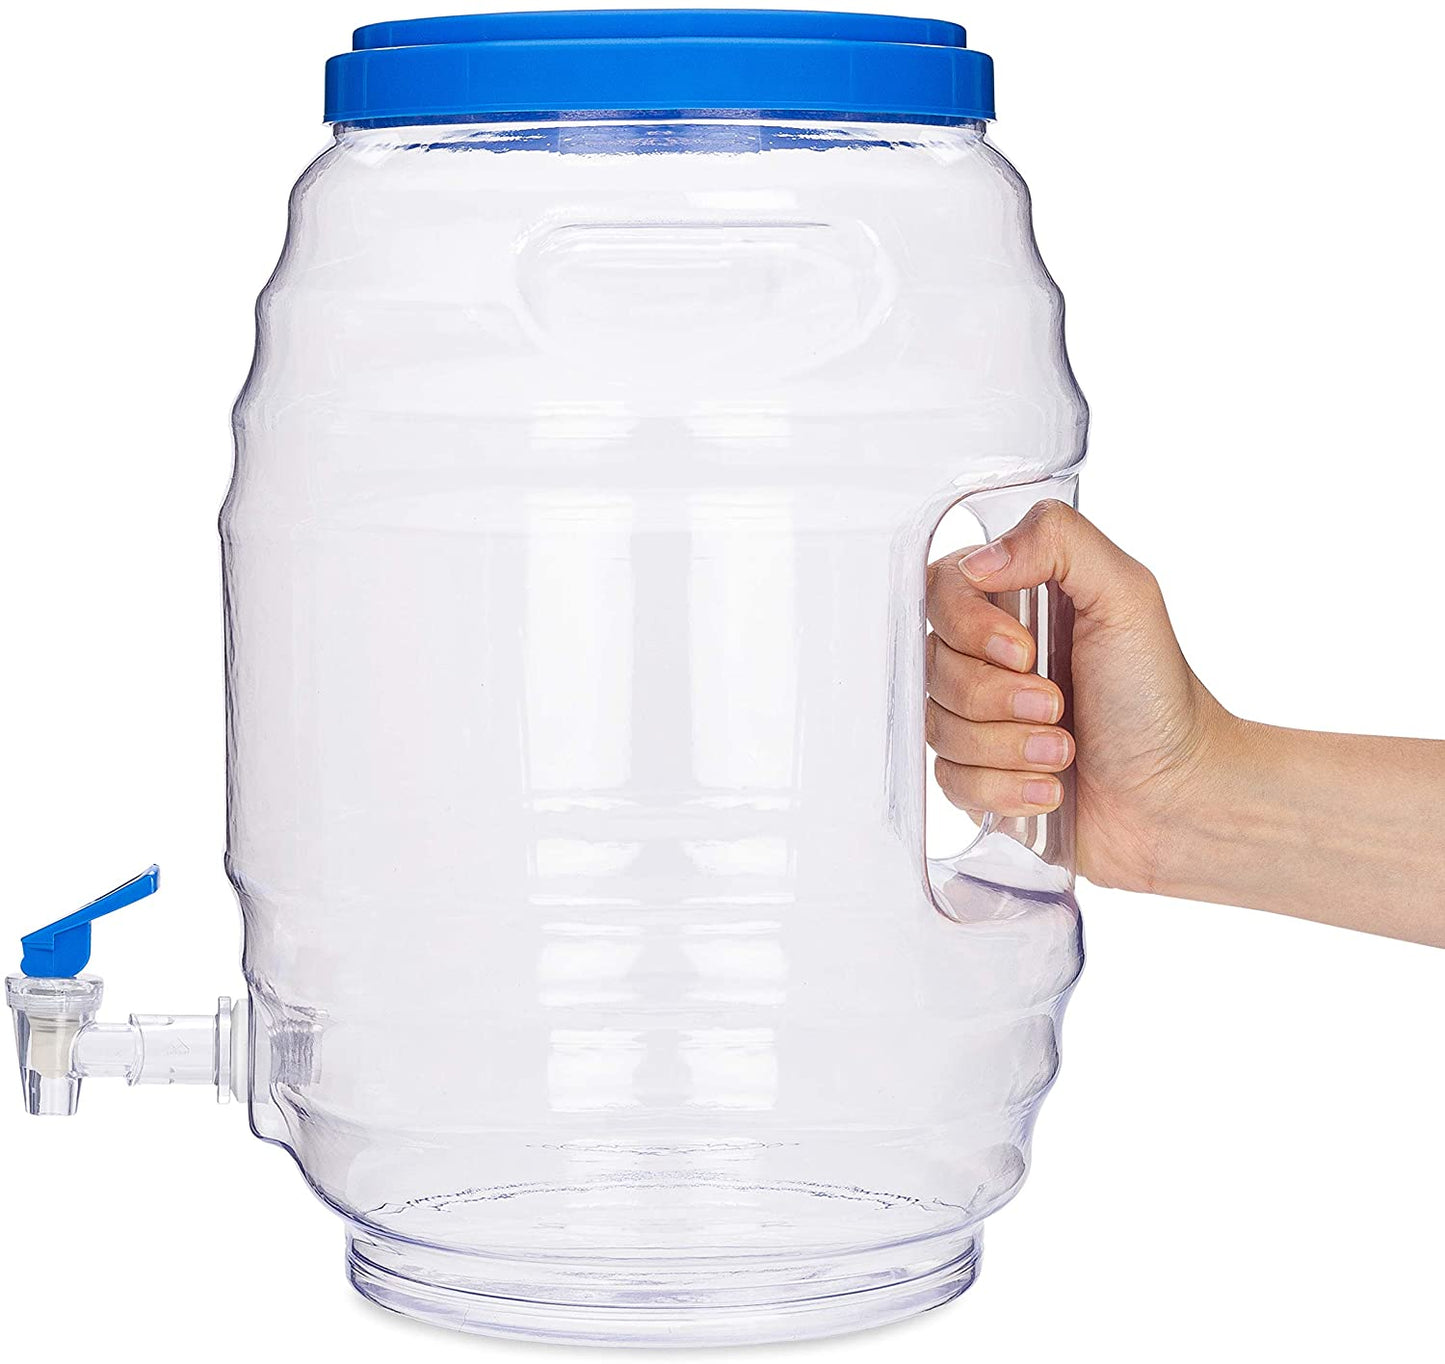 3 GAL Blue Jug Water Container With Lid & Spout